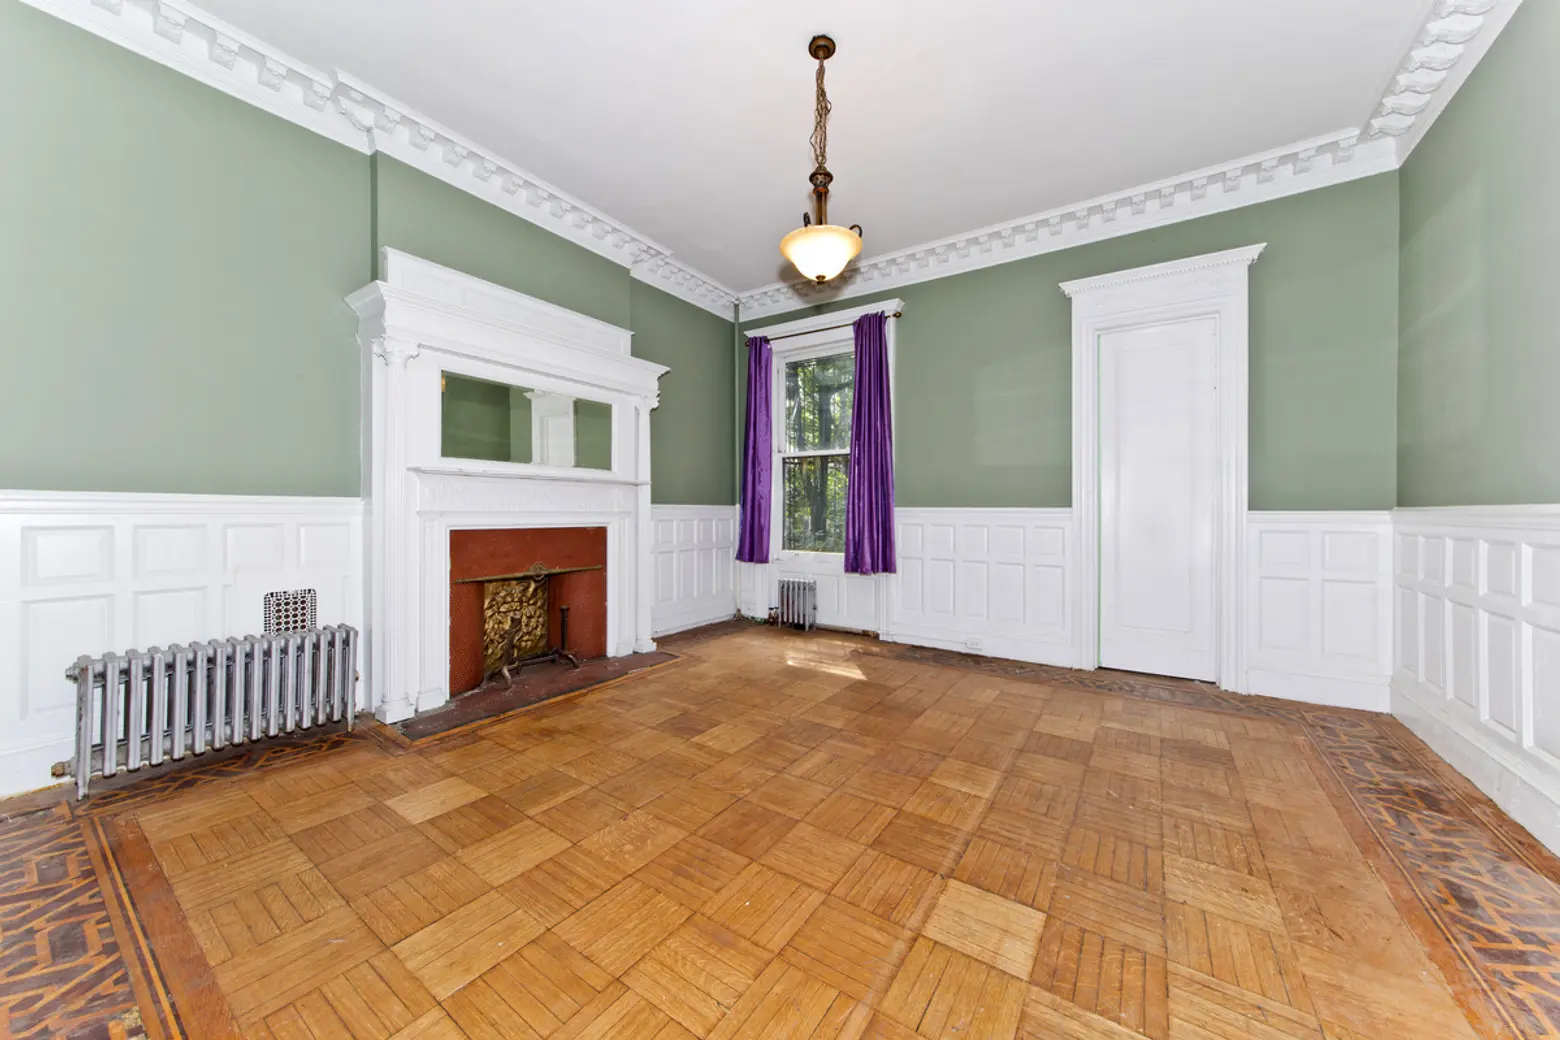 206 West 137th Street, Harlem brownstone, Donald Faison, NYC celebrity real estate